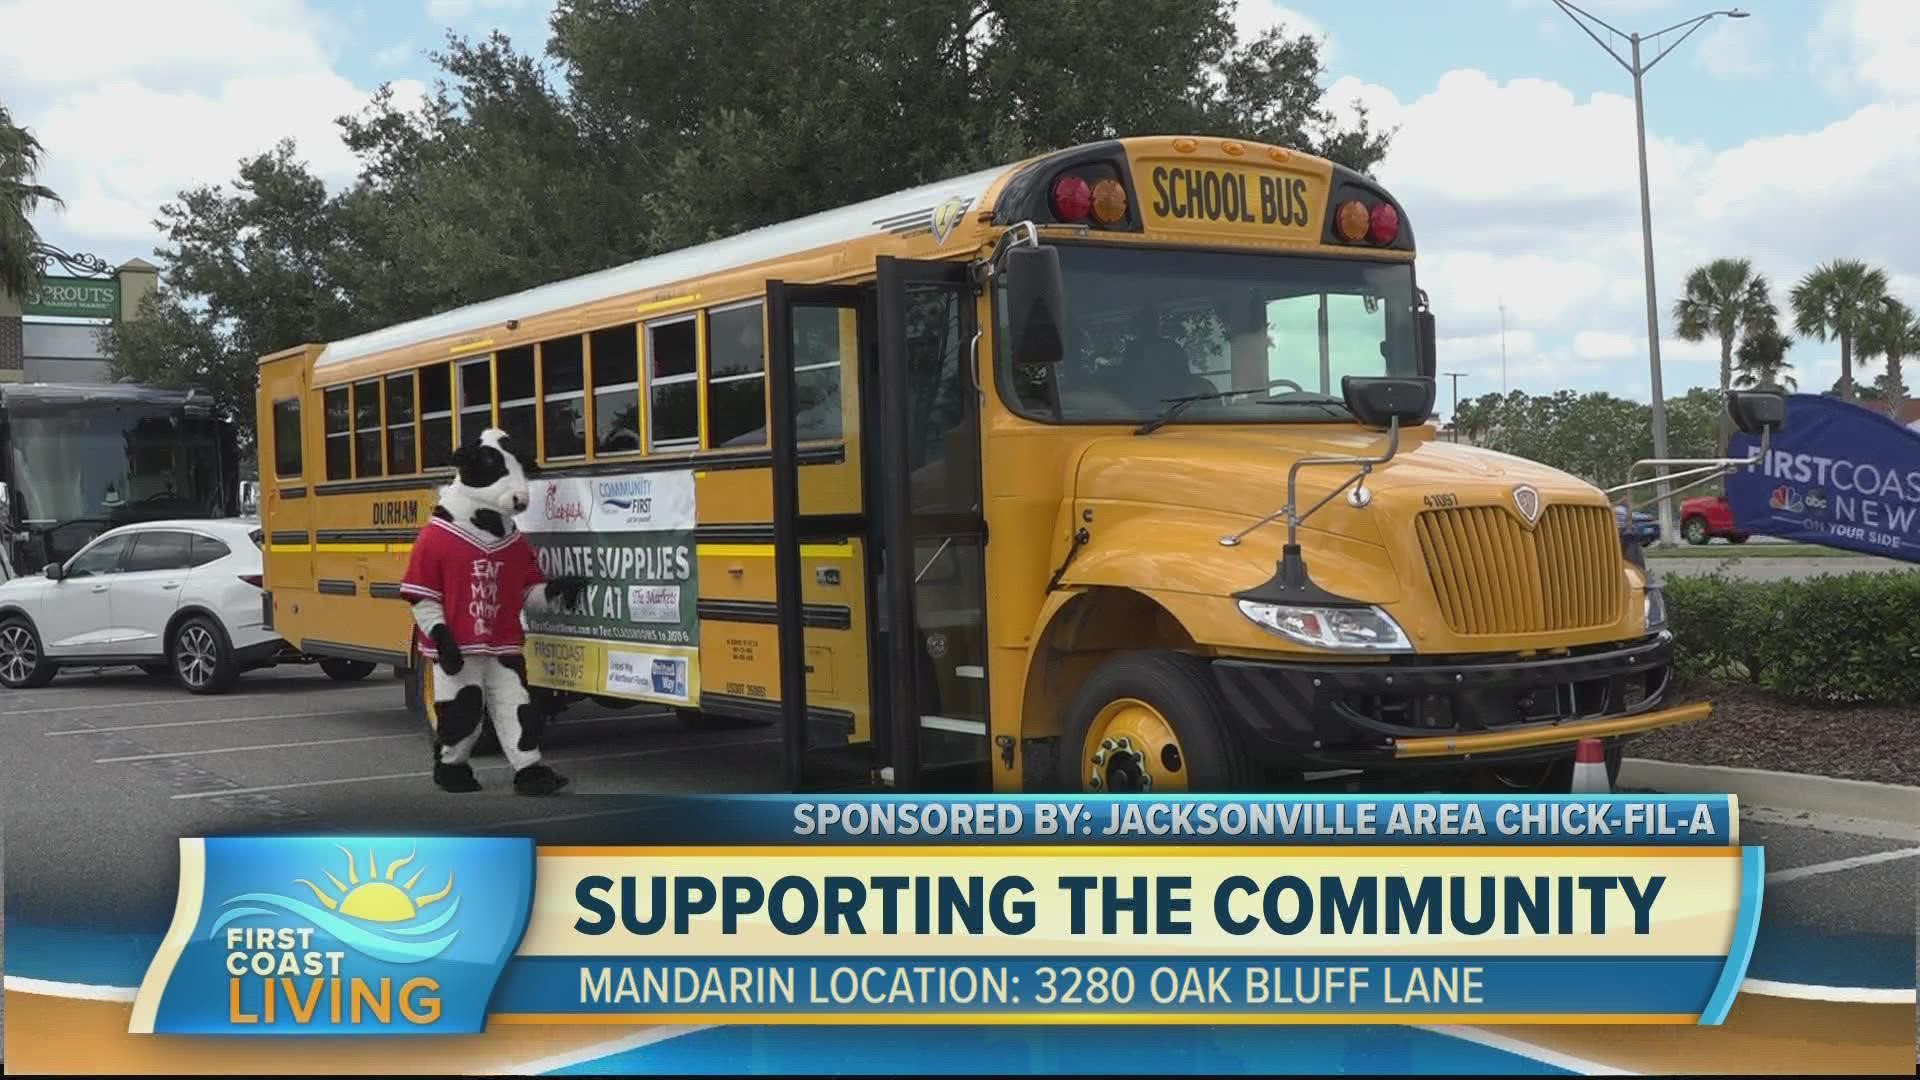 Owner Eric Gillis shares the importance of supporting our local community, specifically students, with scholarships and First Coast News' "Stuff the Bus" event.